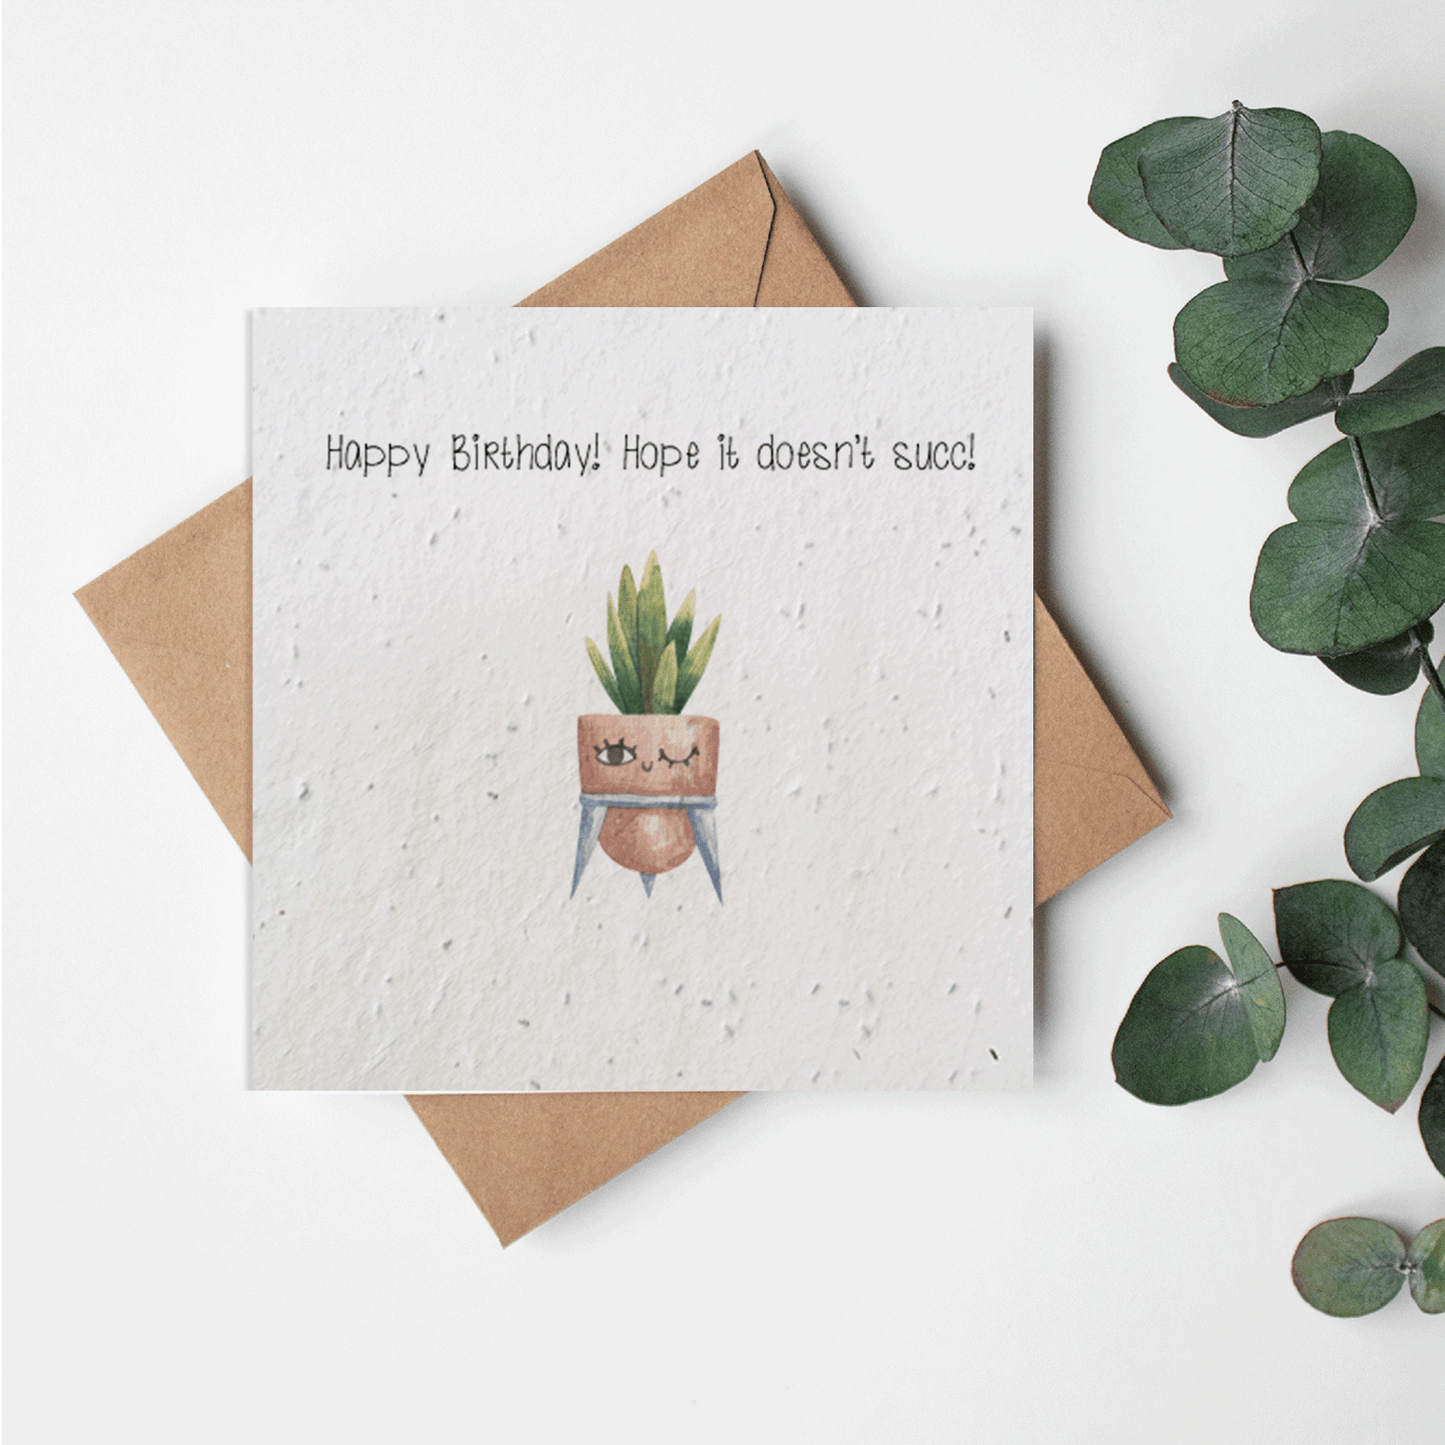 Plant Puns - Hey Bud! How's it growing?